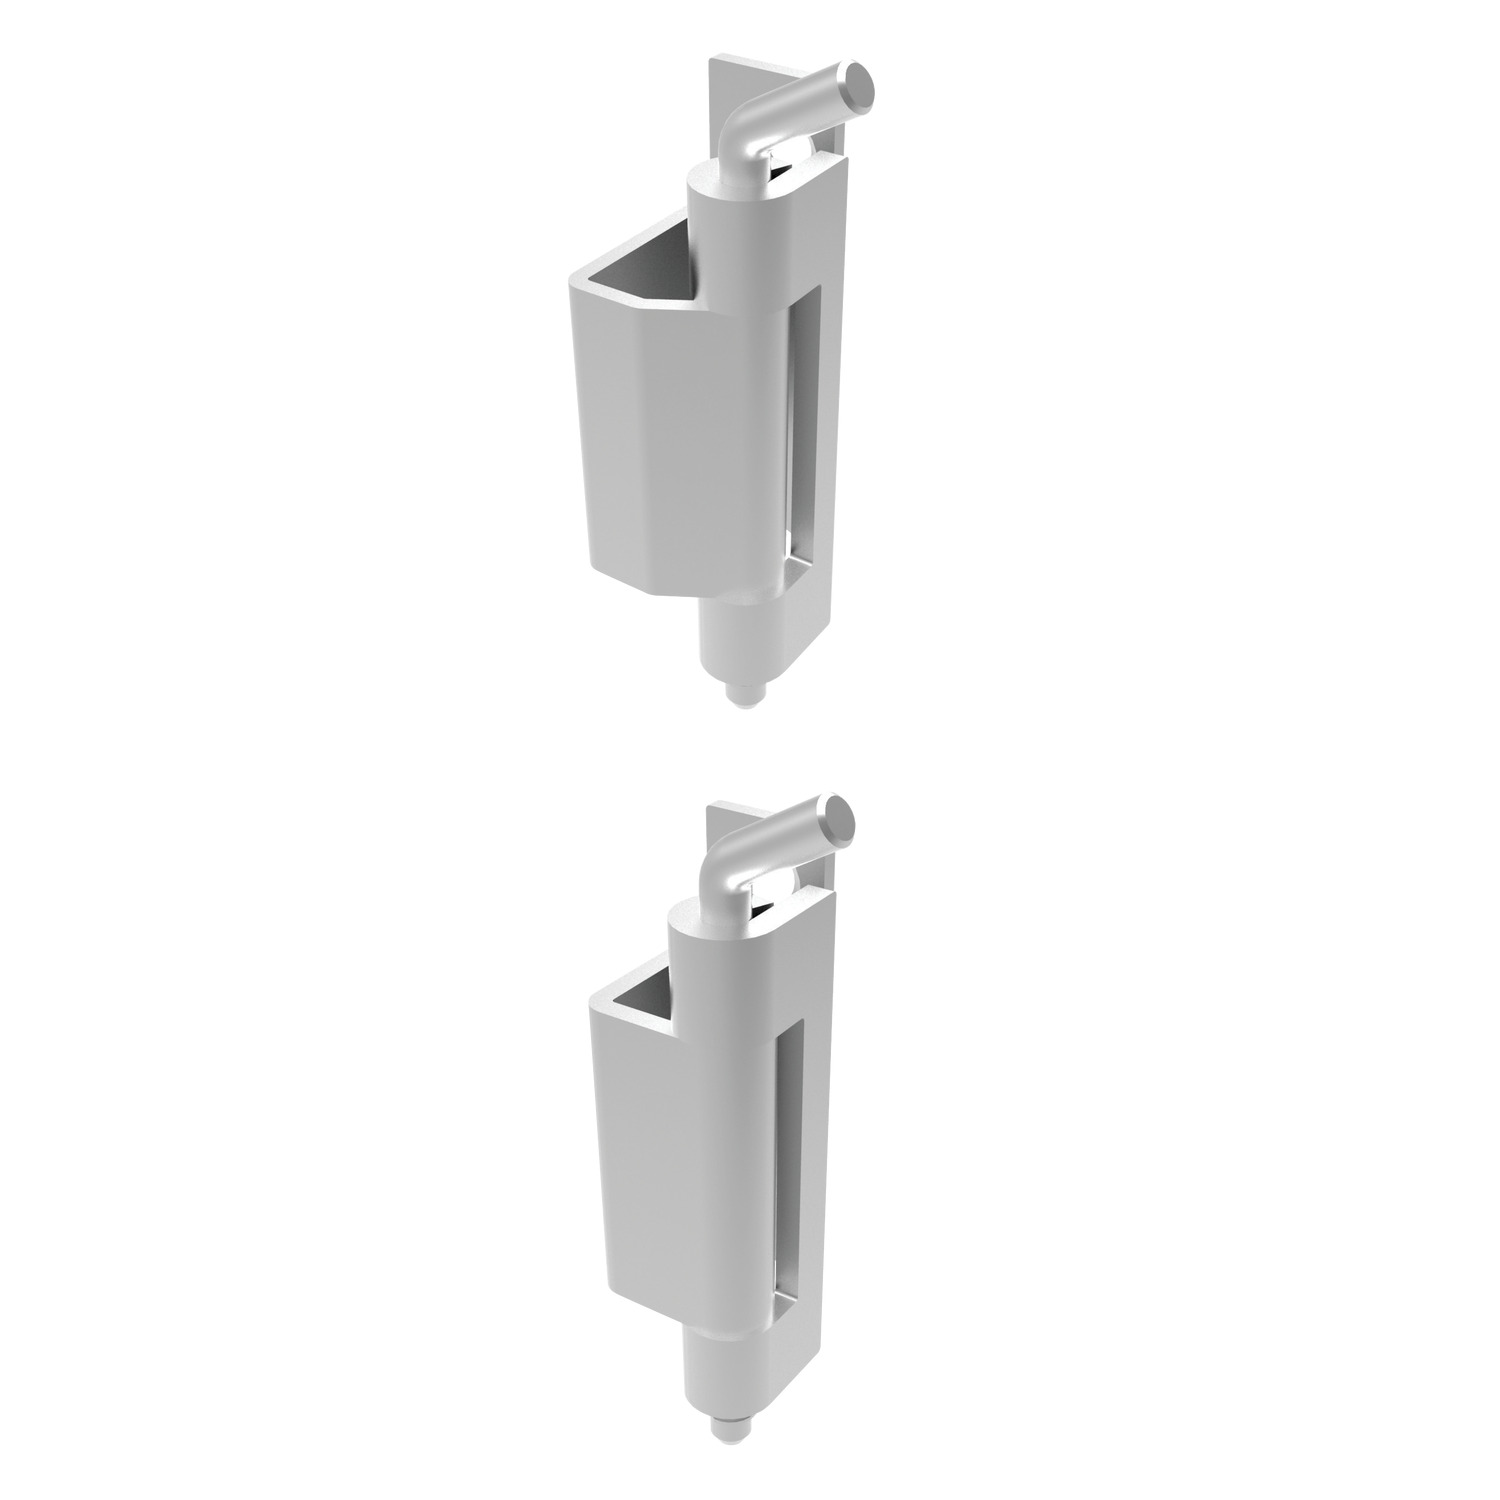 Concealed Pivot Hinges - Lift Off Concealed Pivot Hinges for doors between 22 - 25mm return. Weld and countersunk screws.